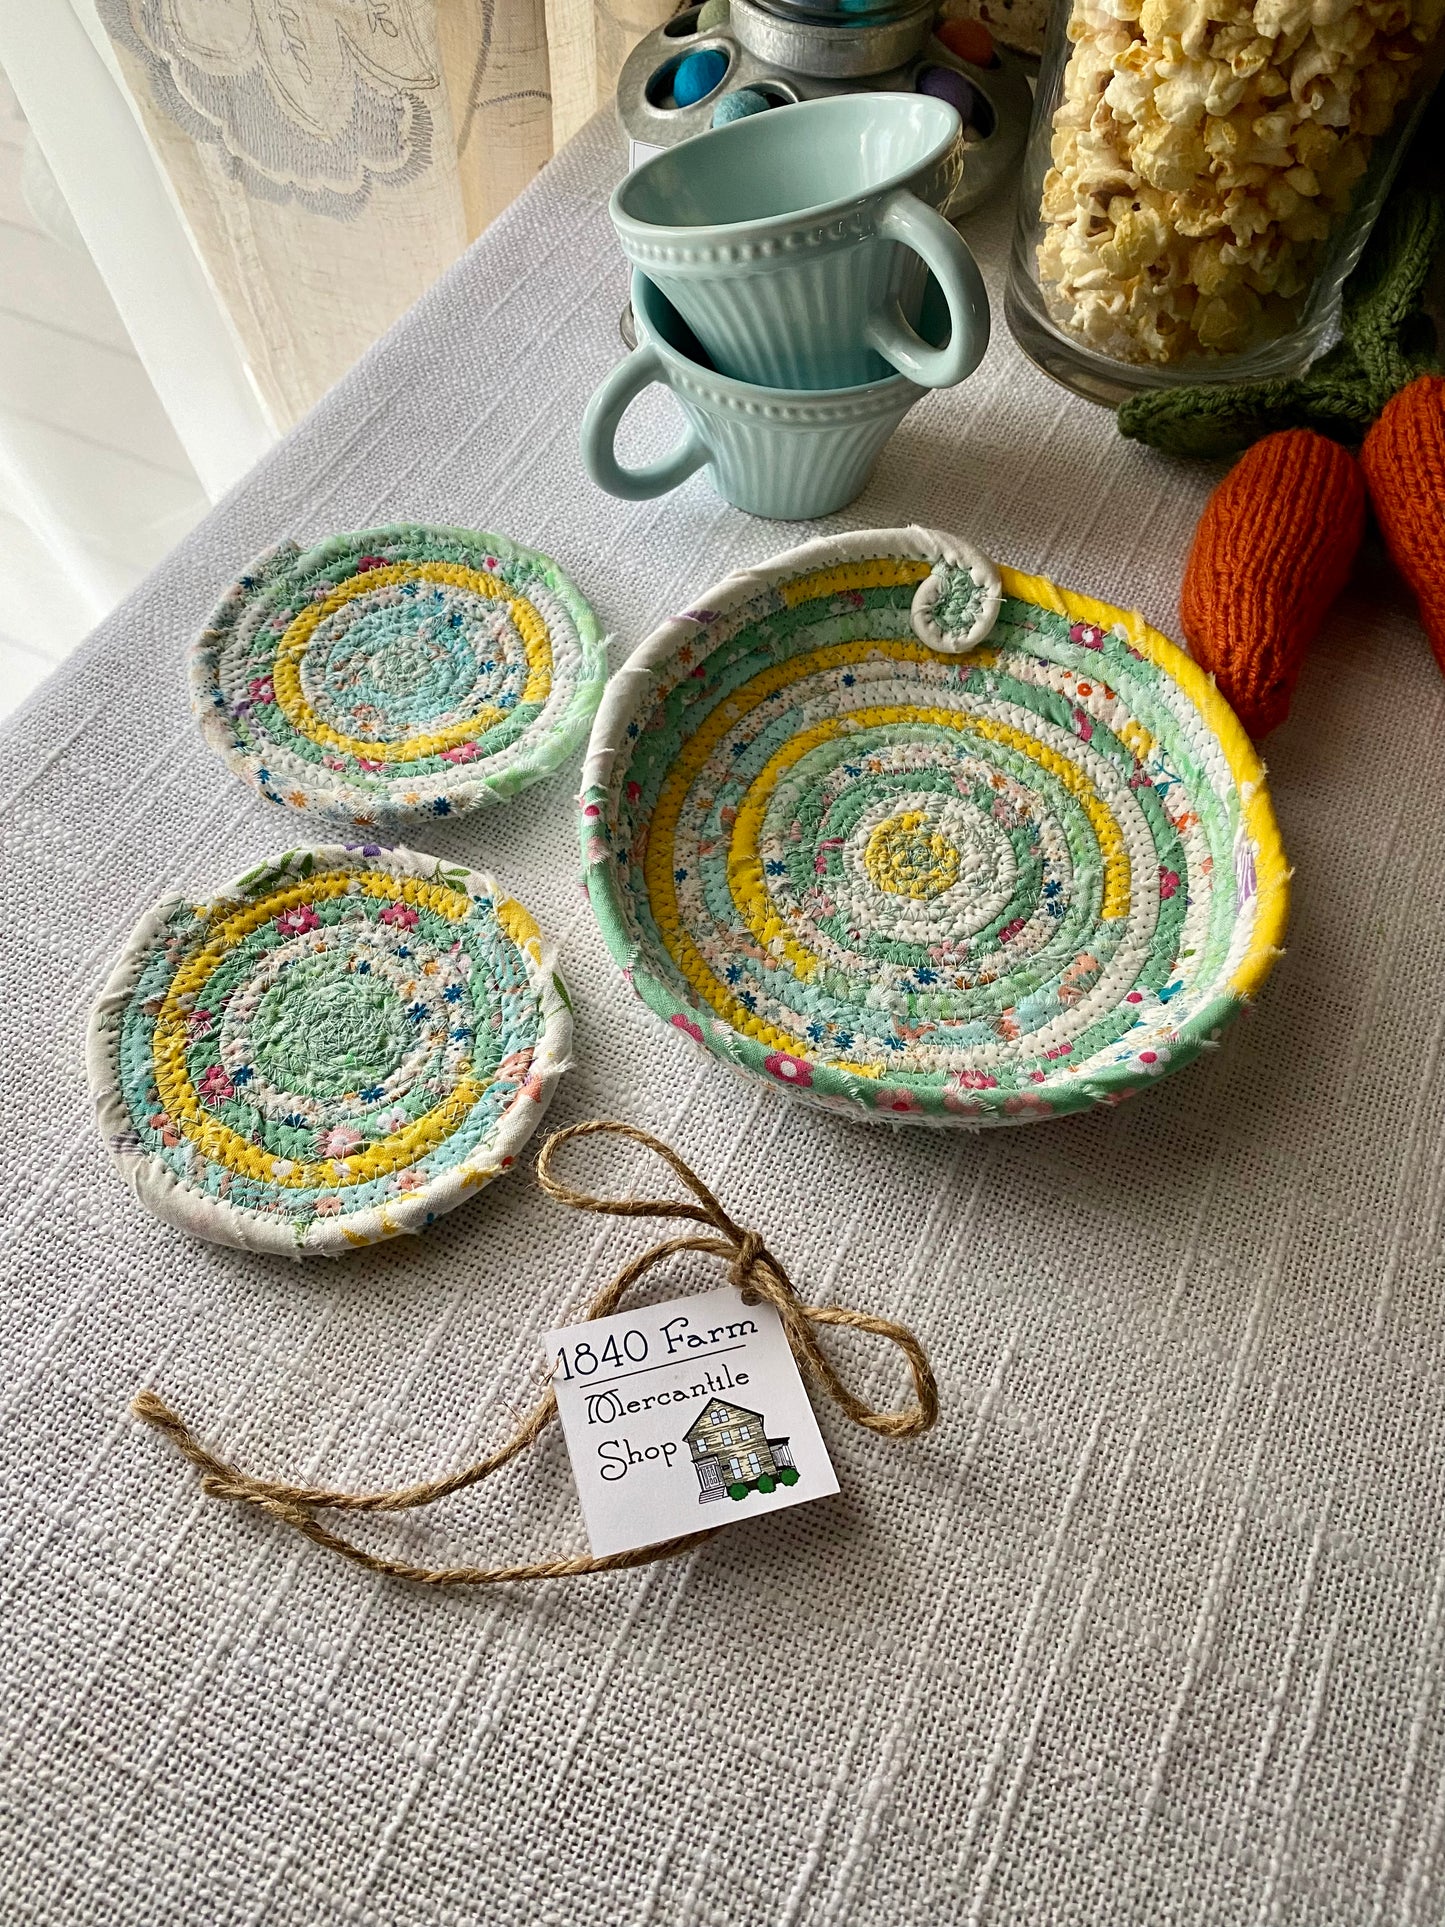 Made to Order 6” Medium Saucer Style Trivet and Set of Two Coasters